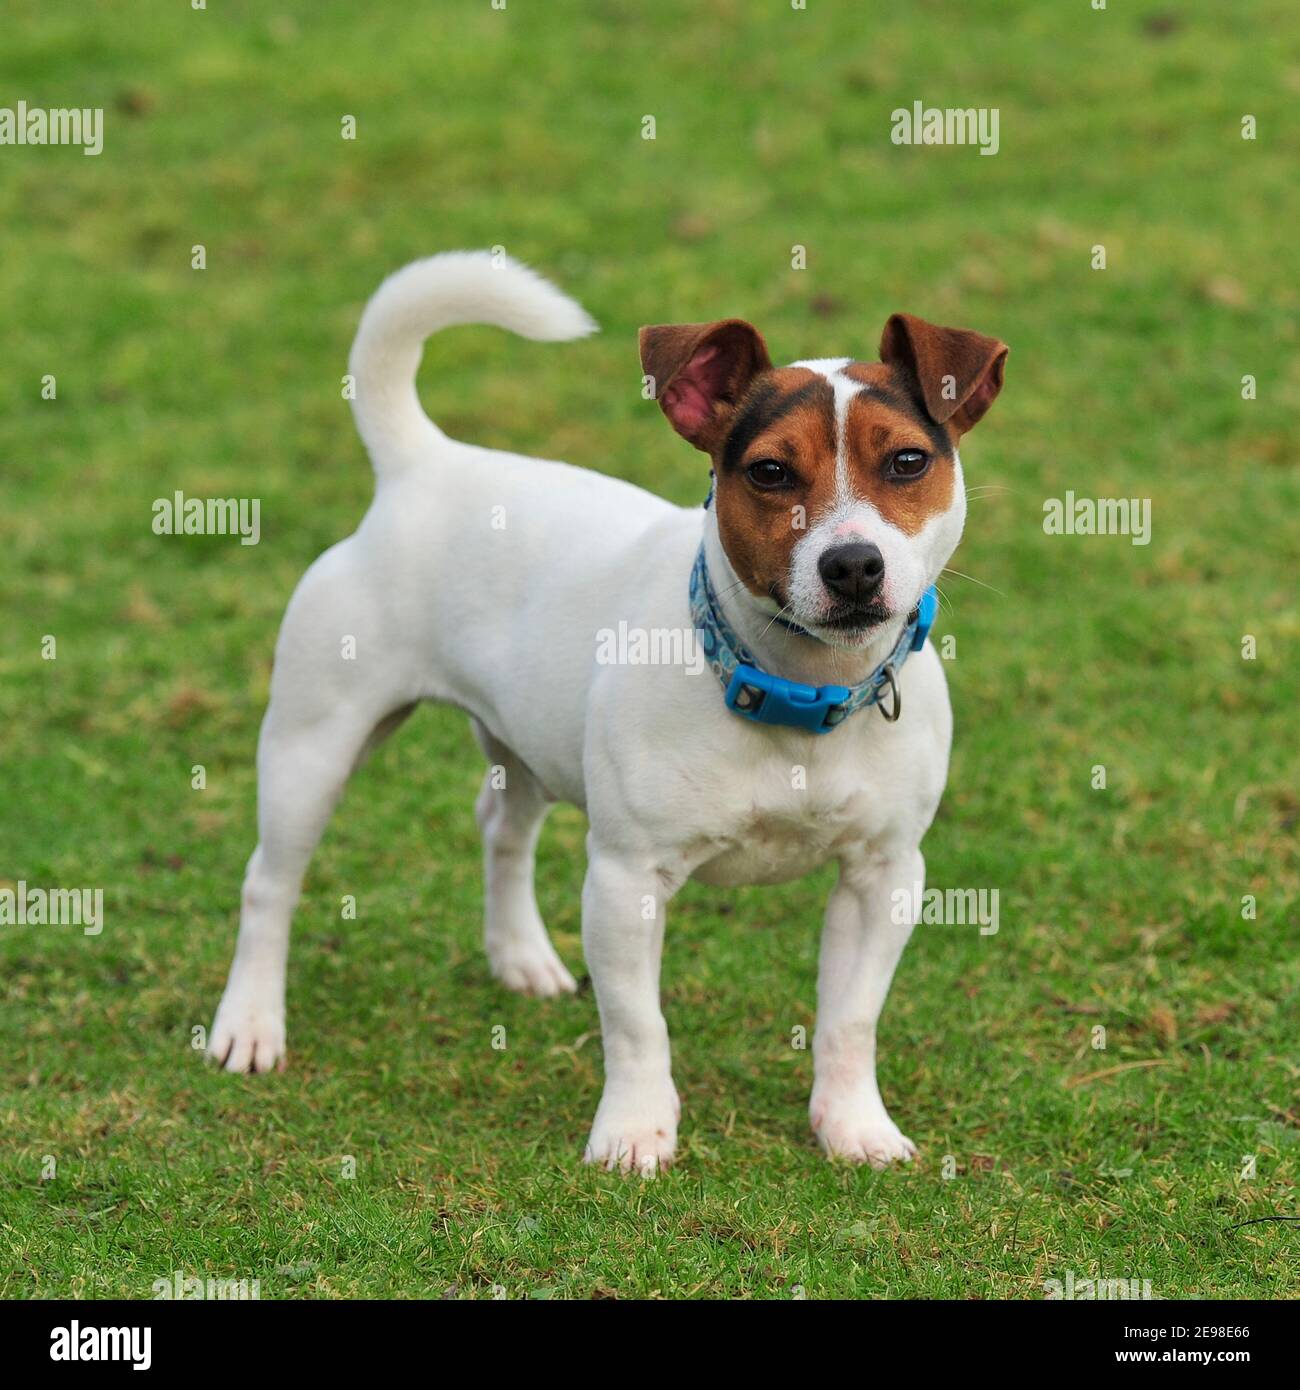 Jack Russell terrier dog Stock Photo